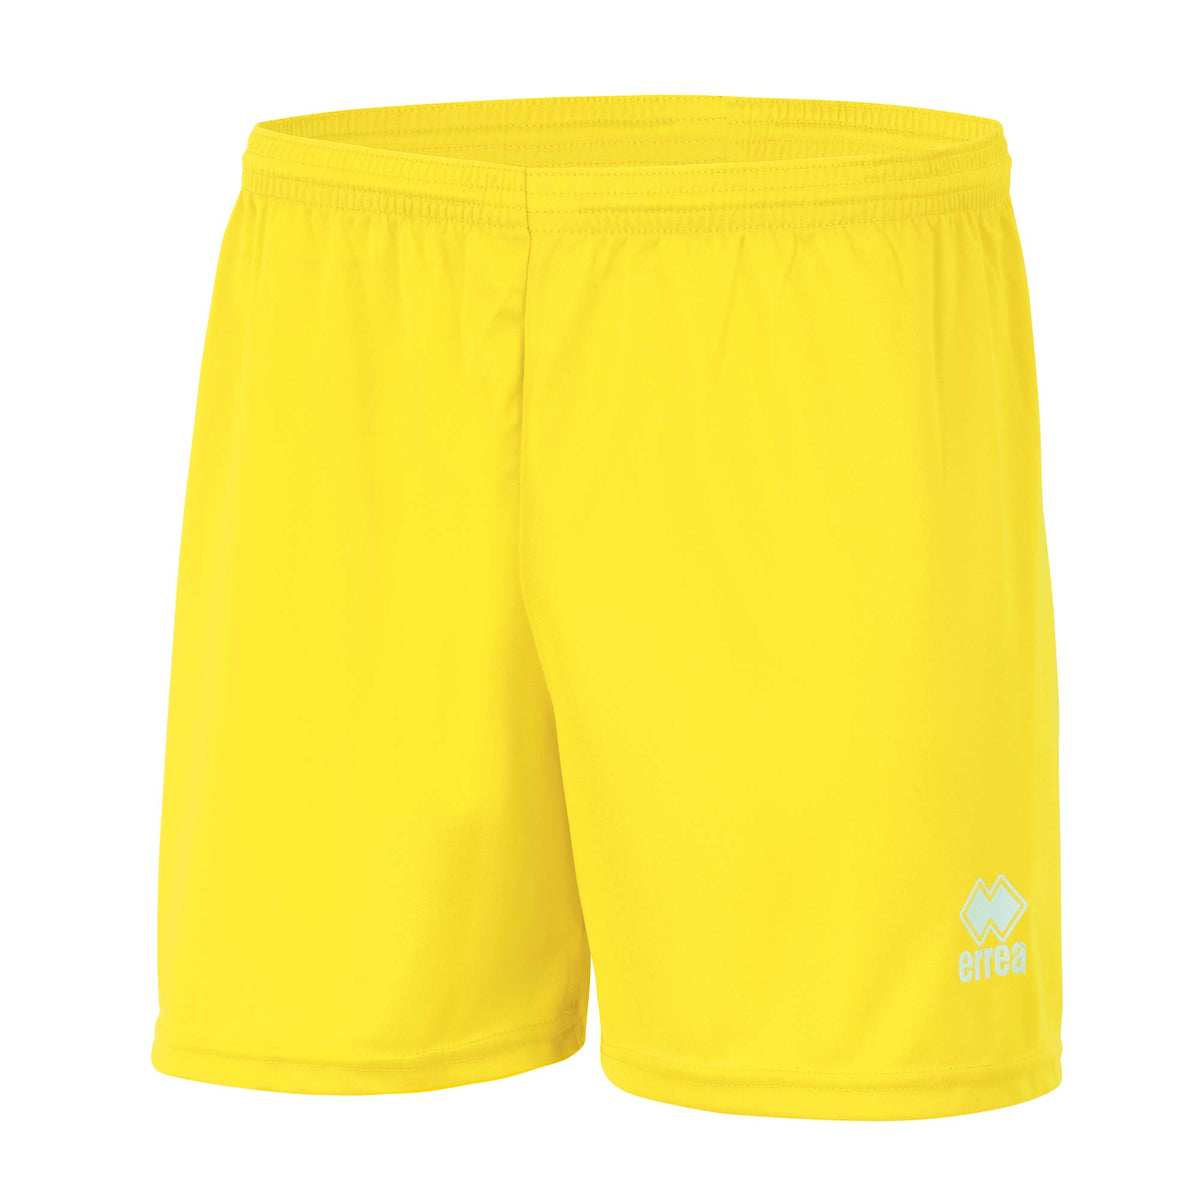 New Skin Shorts in Adult